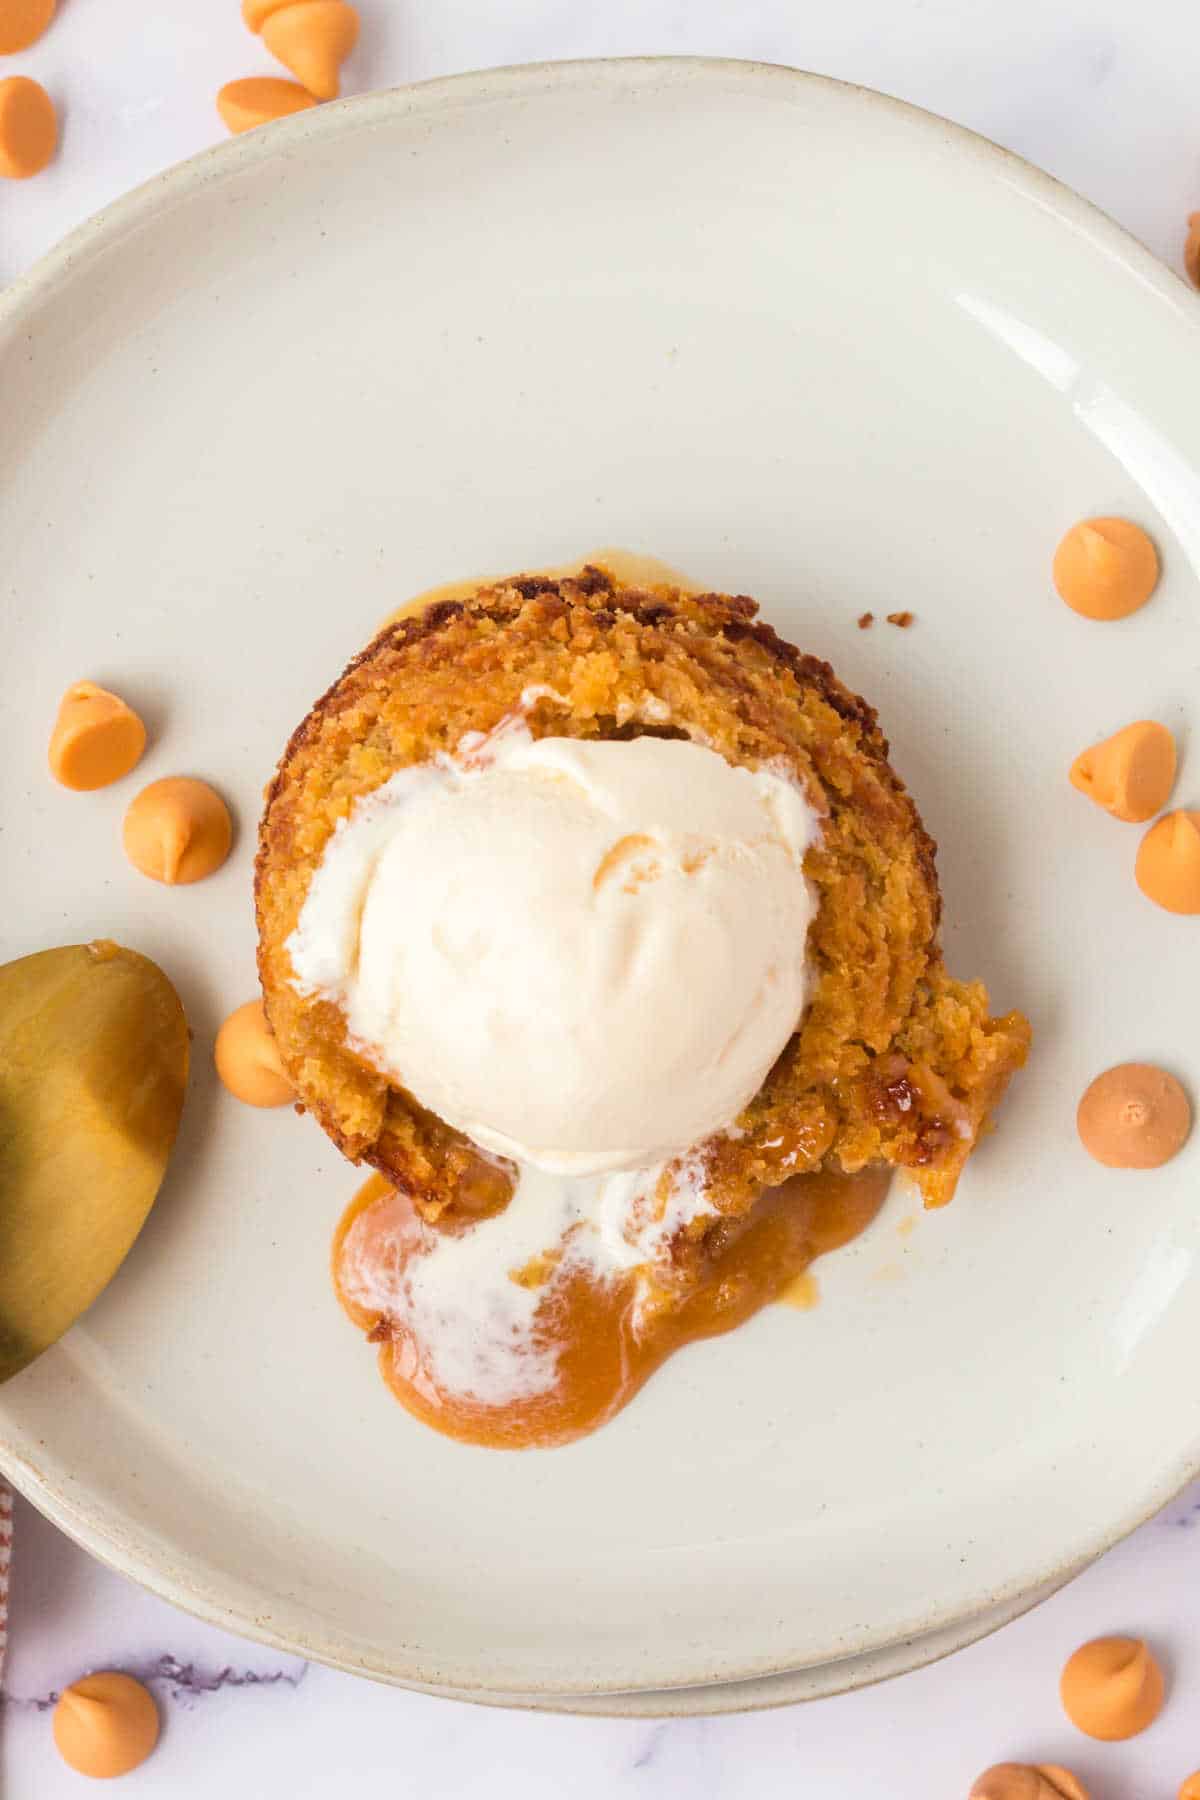 A butterscotch lava cake topped with vanilla ice cream.